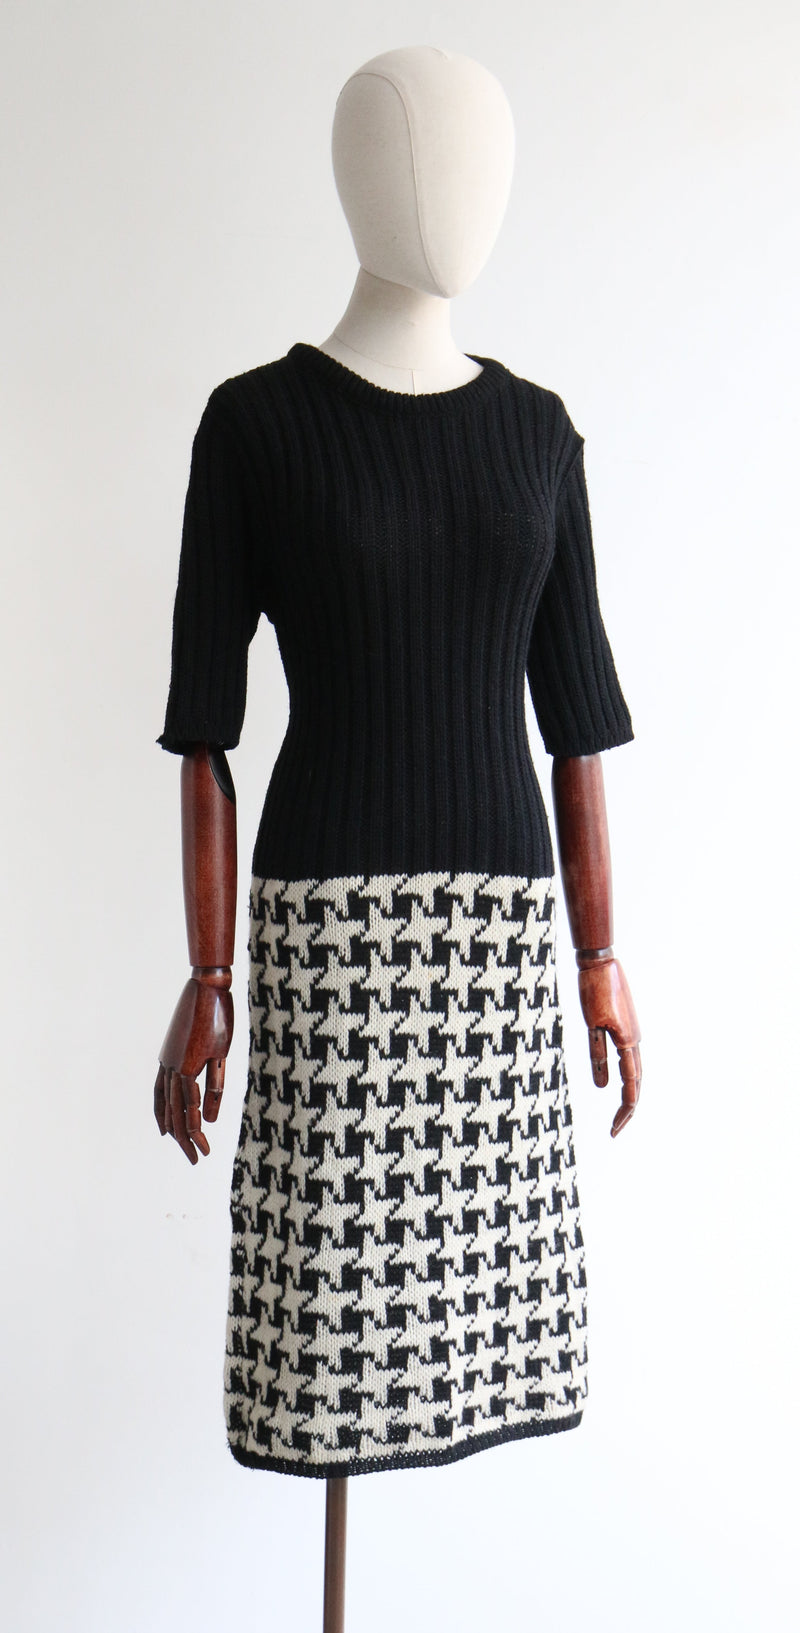 "Dogtooth Knit" Vintage 1960's Dogtooth Knitted Dress UK 12 US 8